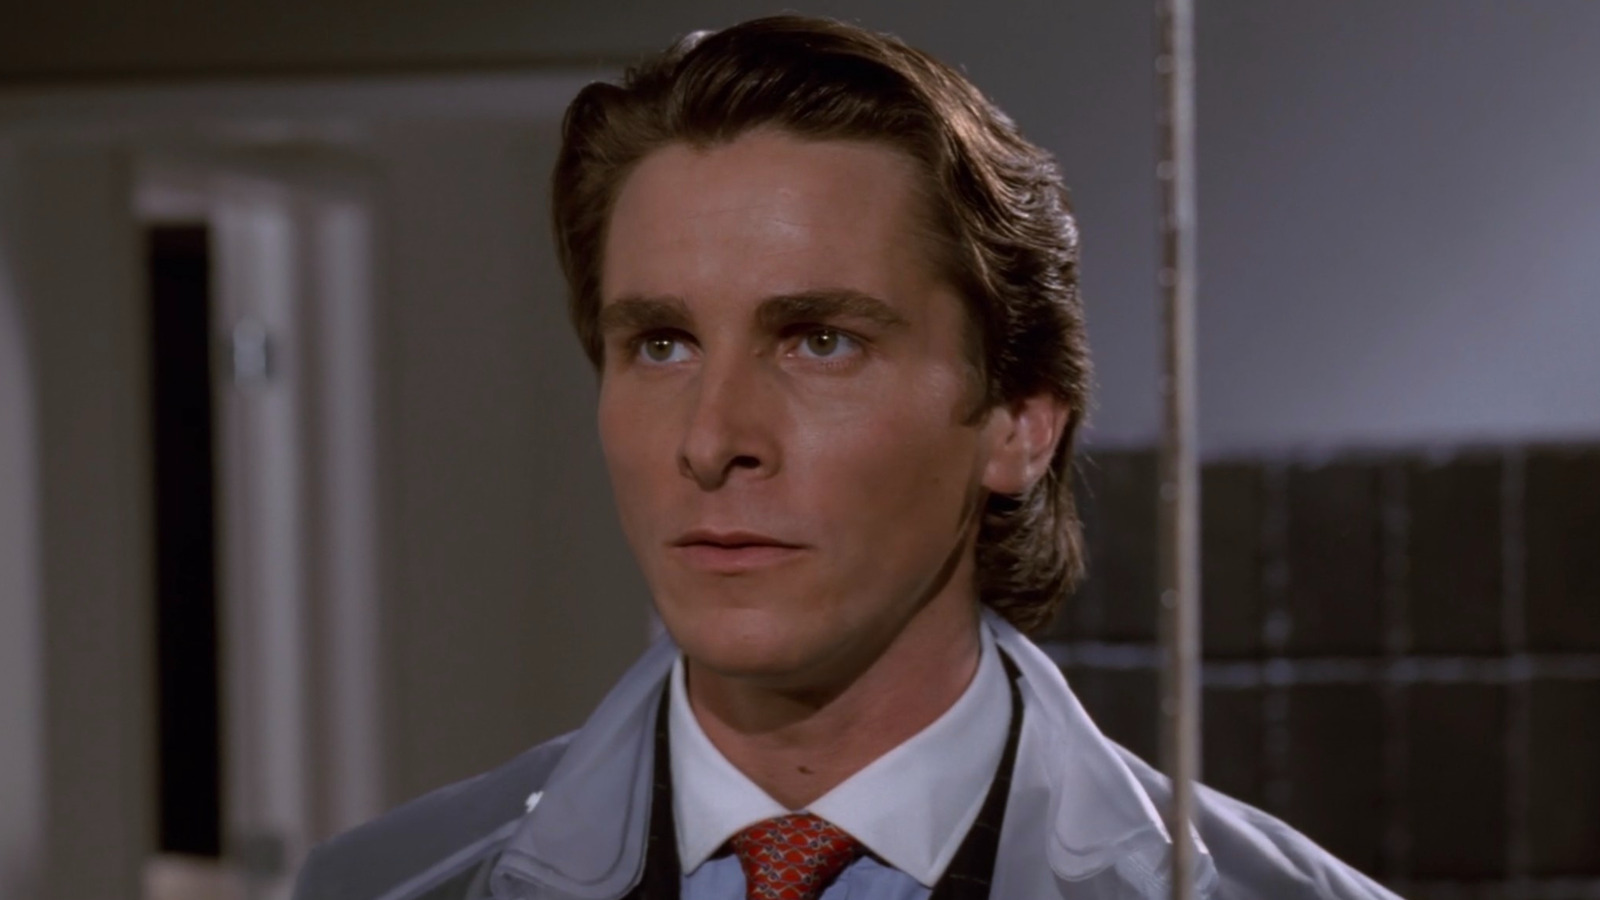 Becoming American Psycho S Patrick Bateman Bordered On Obsession For Christian Bale